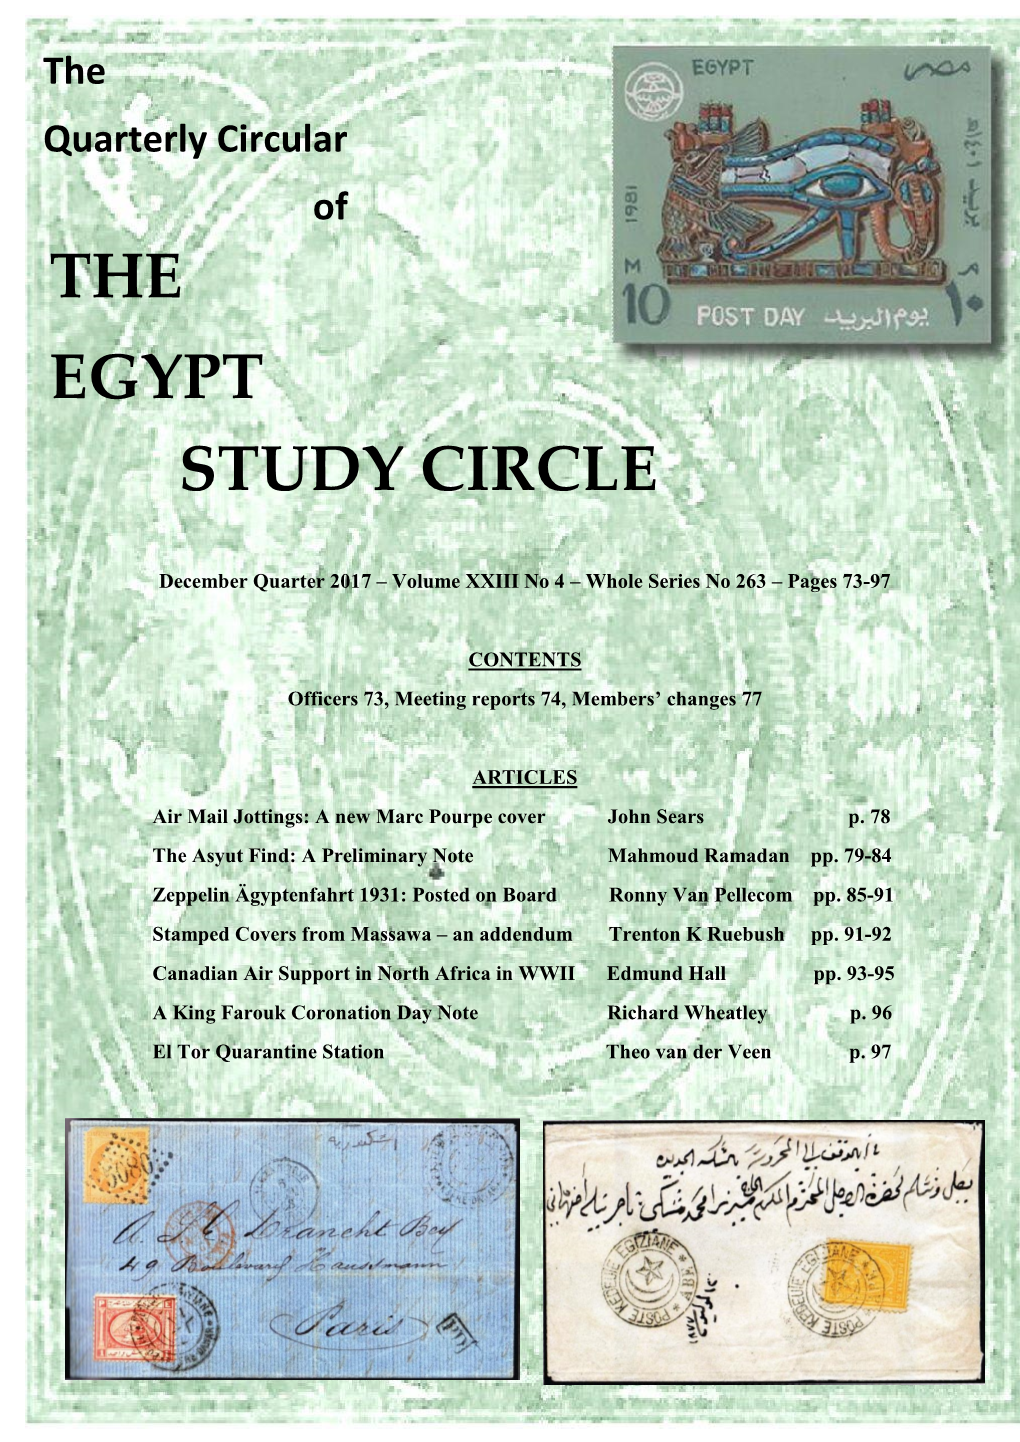 The Quarterly Circular of the EGYPT STUDY